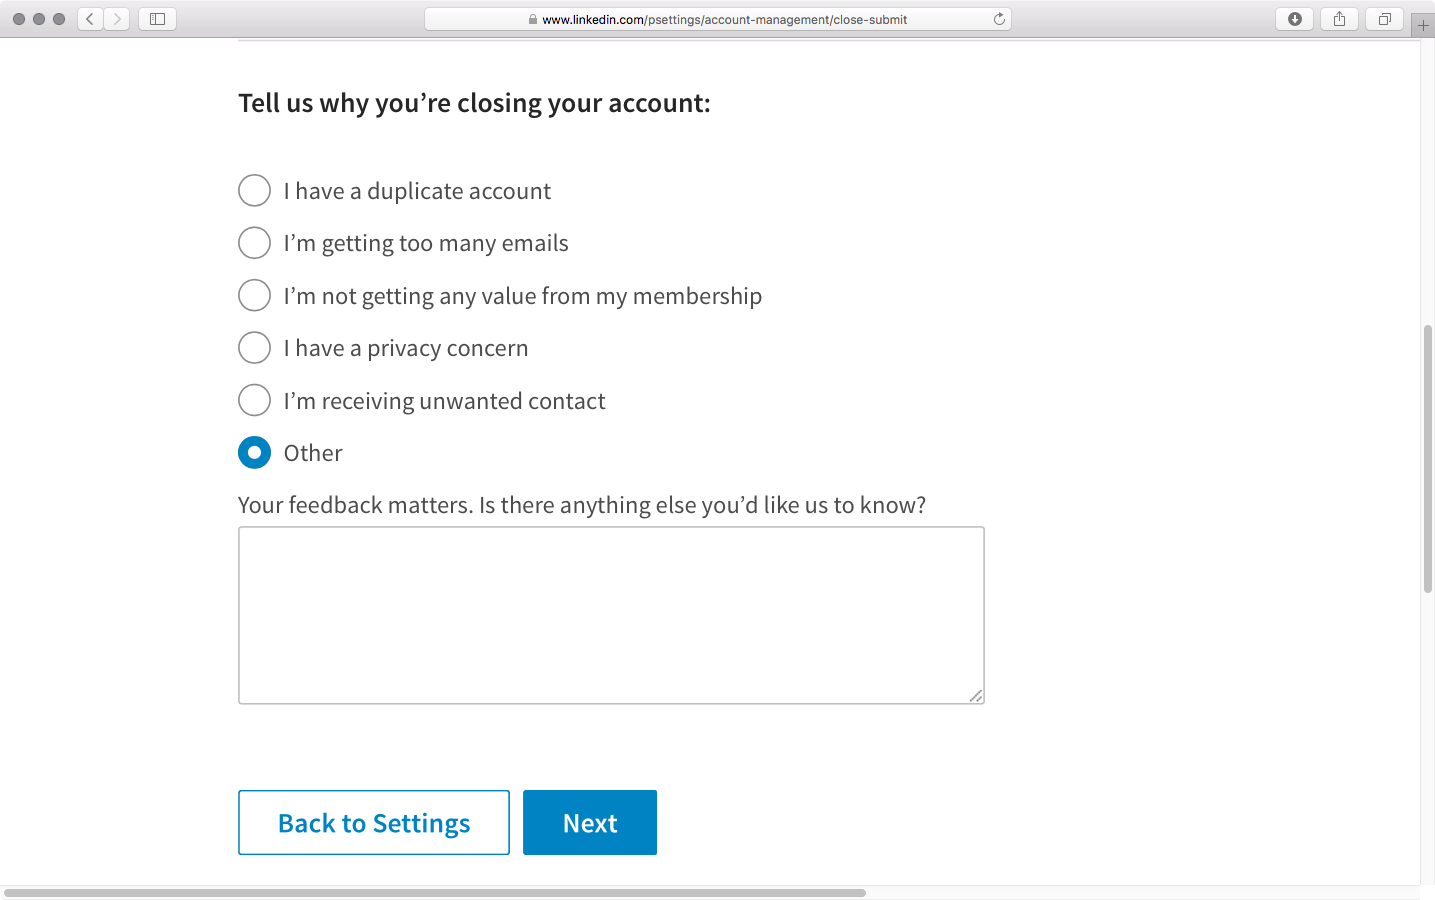 Reason for closing your LinkedIn account